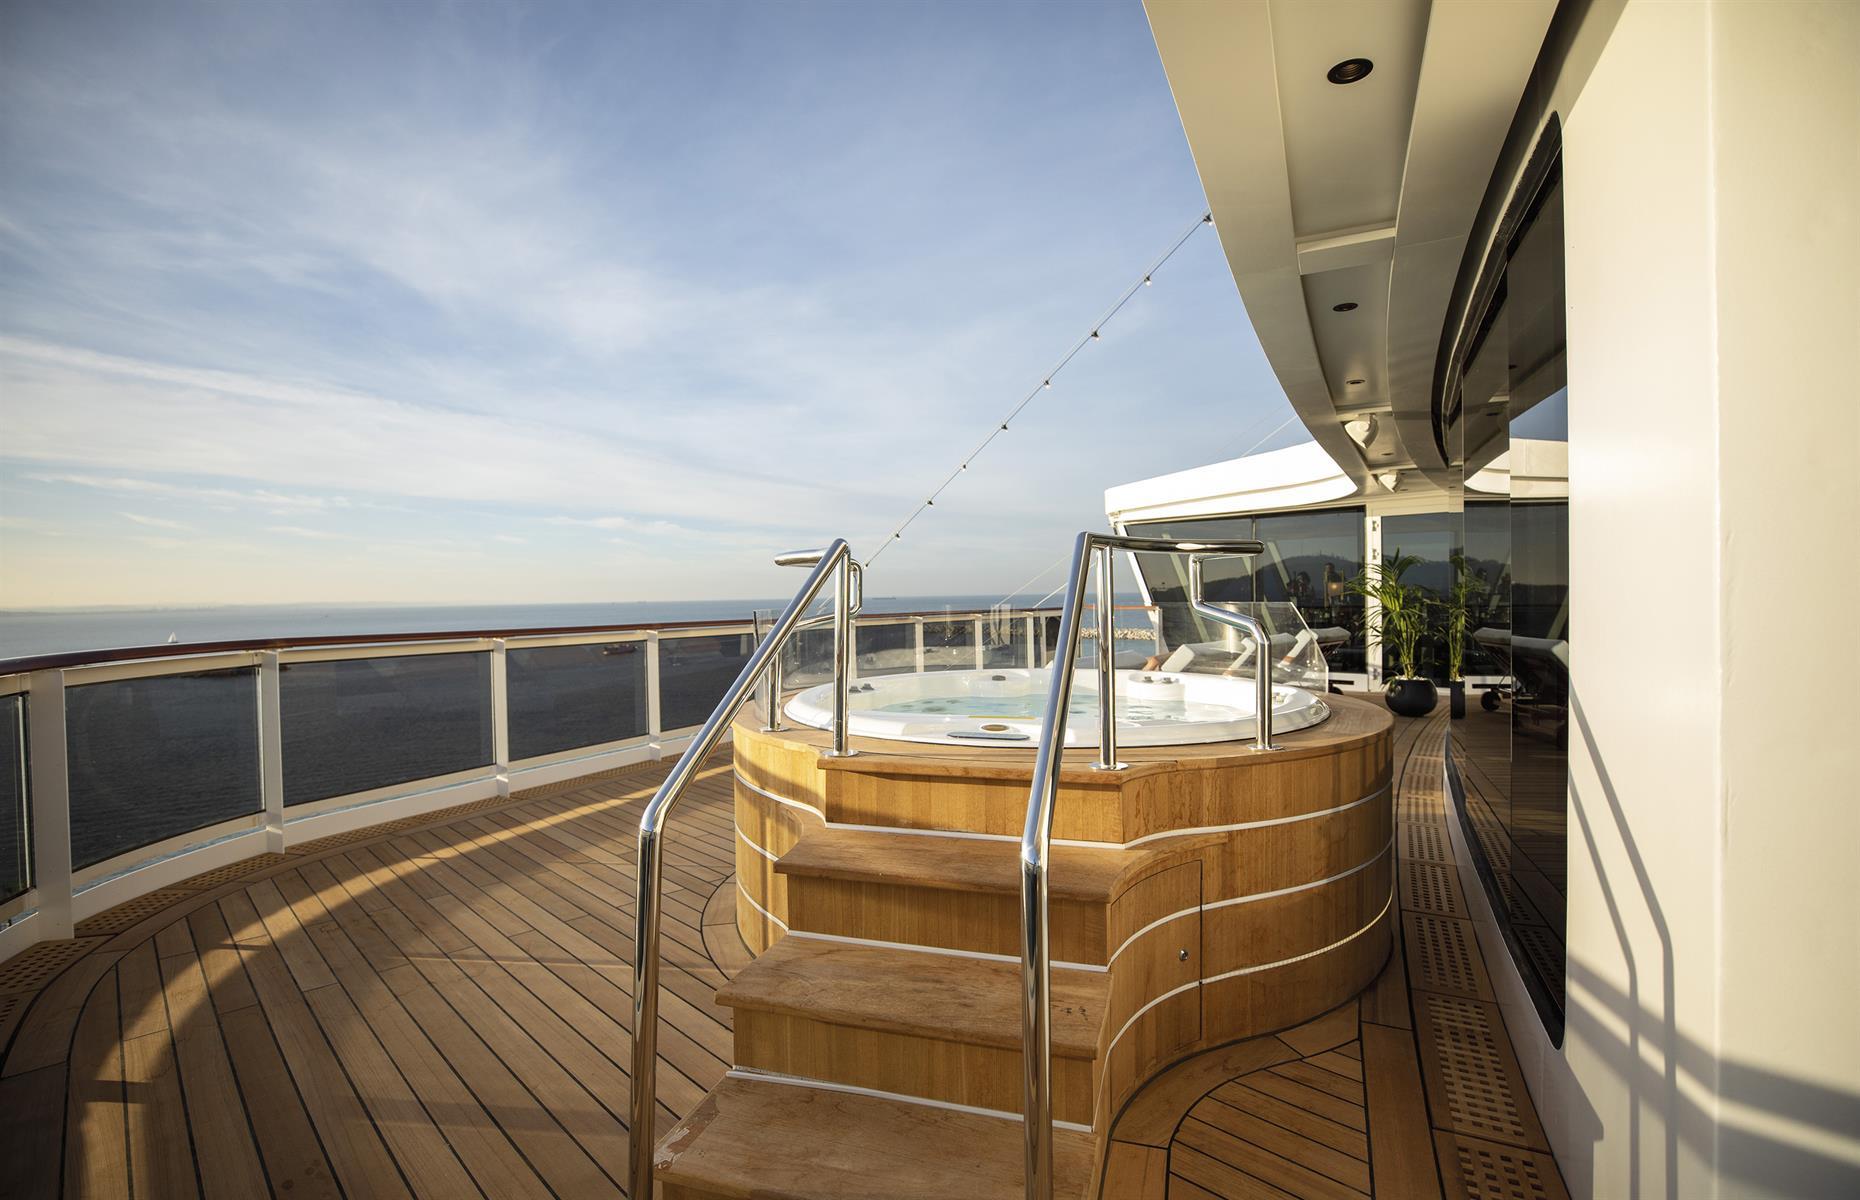 <p>Each of the beautifully appointed suites has a private balcony, while the palatial Regent Suite – perched on the 14th deck – has a wraparound veranda over the ship’s bow. Its custom-made Treesse mini-pool spa is situated on the front balcony, while the king-sized Vividus bed was handcrafted by upscale Swedish brand, Hästens.</p>  <p><a href="https://www.loveexploring.com/news/121730/what-is-it-like-on-a-cruise-ship-2022"><strong>Now discover what to expect from a cruise in 2022</strong></a></p>